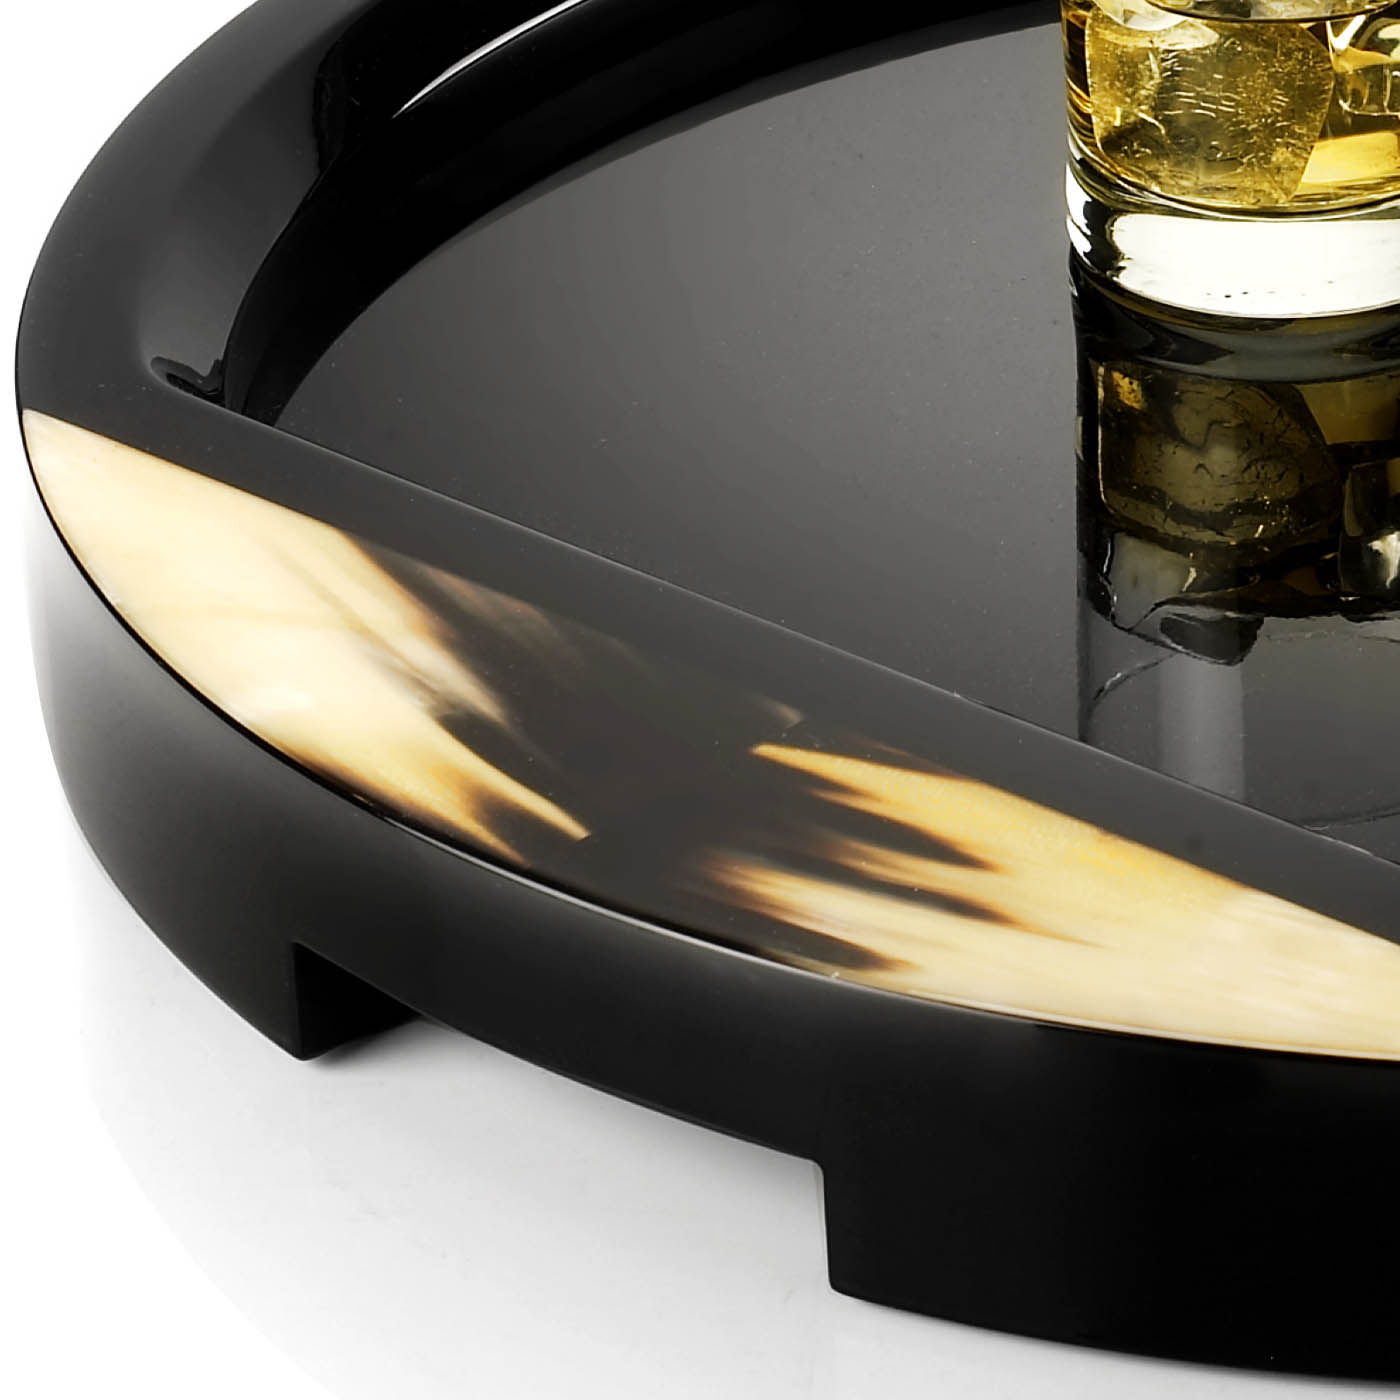 Tableware - Gillo tray in horn and glossy black lacquered wood - detail - Arcahorn